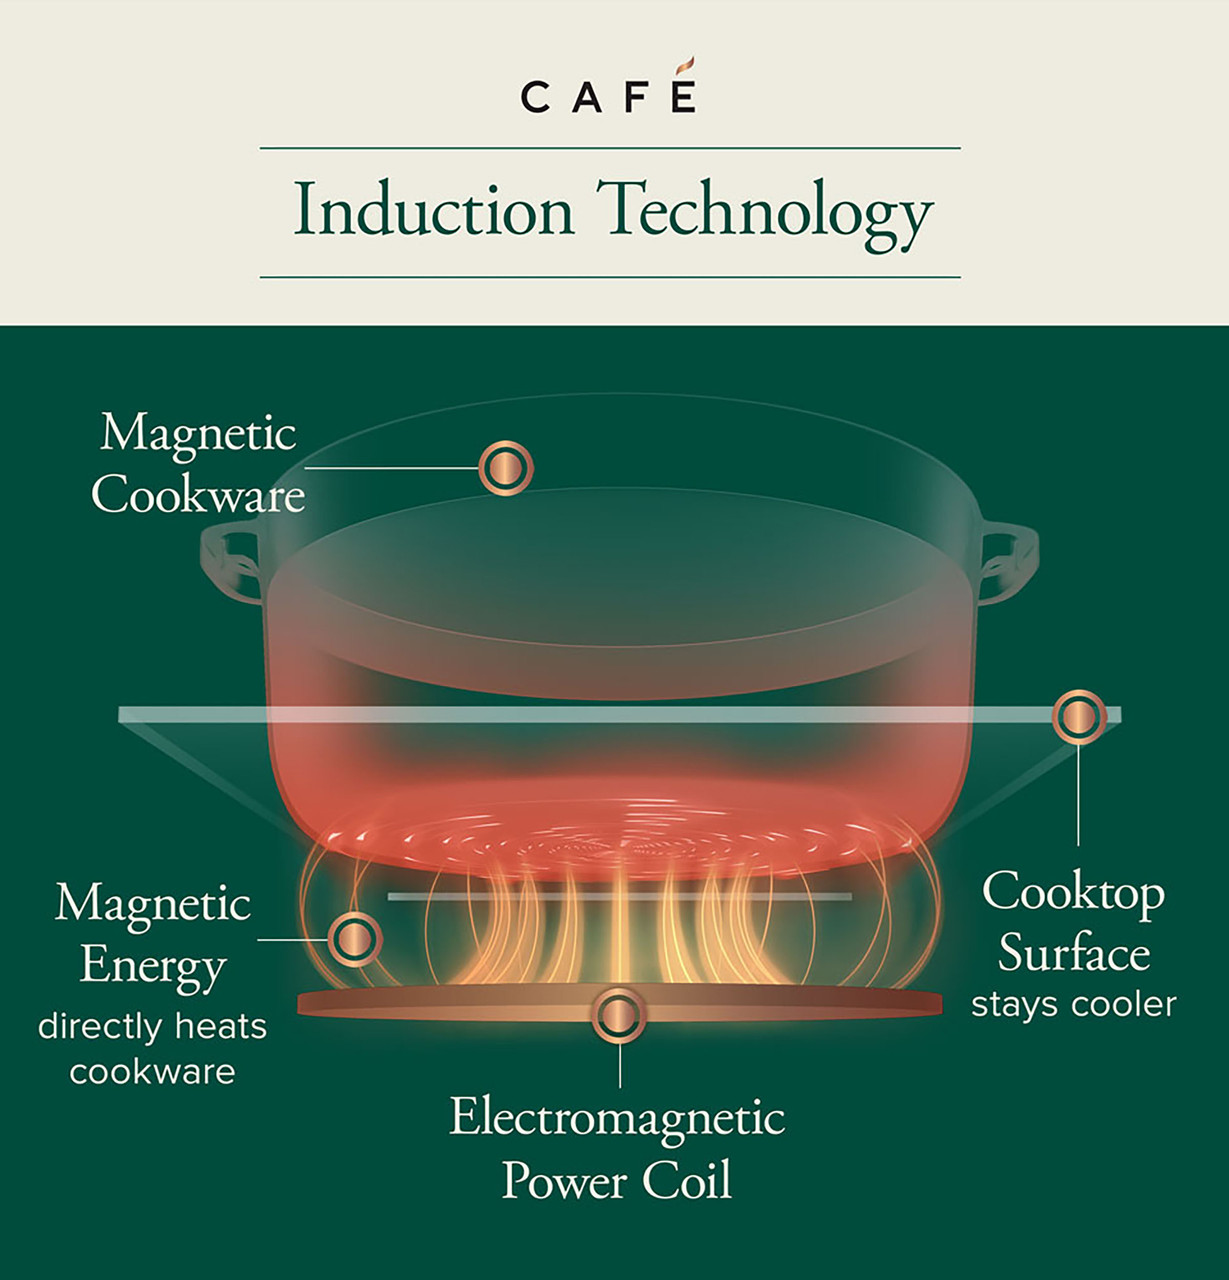 Café™ Series 36 Built-In Touch Control Induction Cooktop - CHP90361TBB -  Cafe Appliances